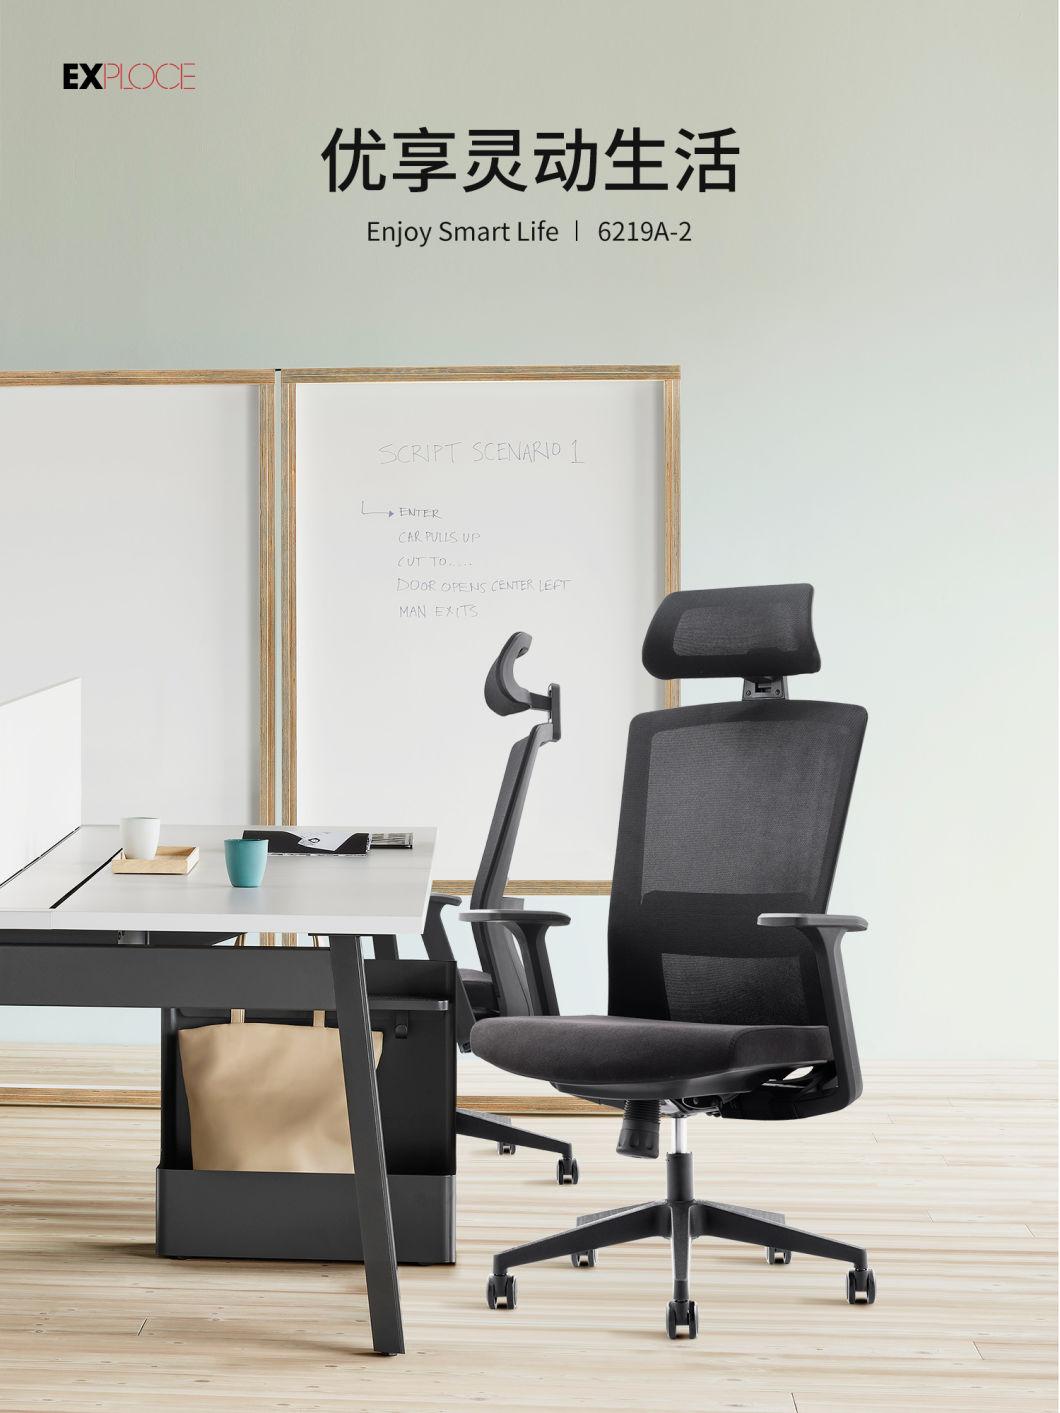 Customized with Armrest Foshan Plastic Chair Ergonomic Wholesale Chairs Executive Office Furniture